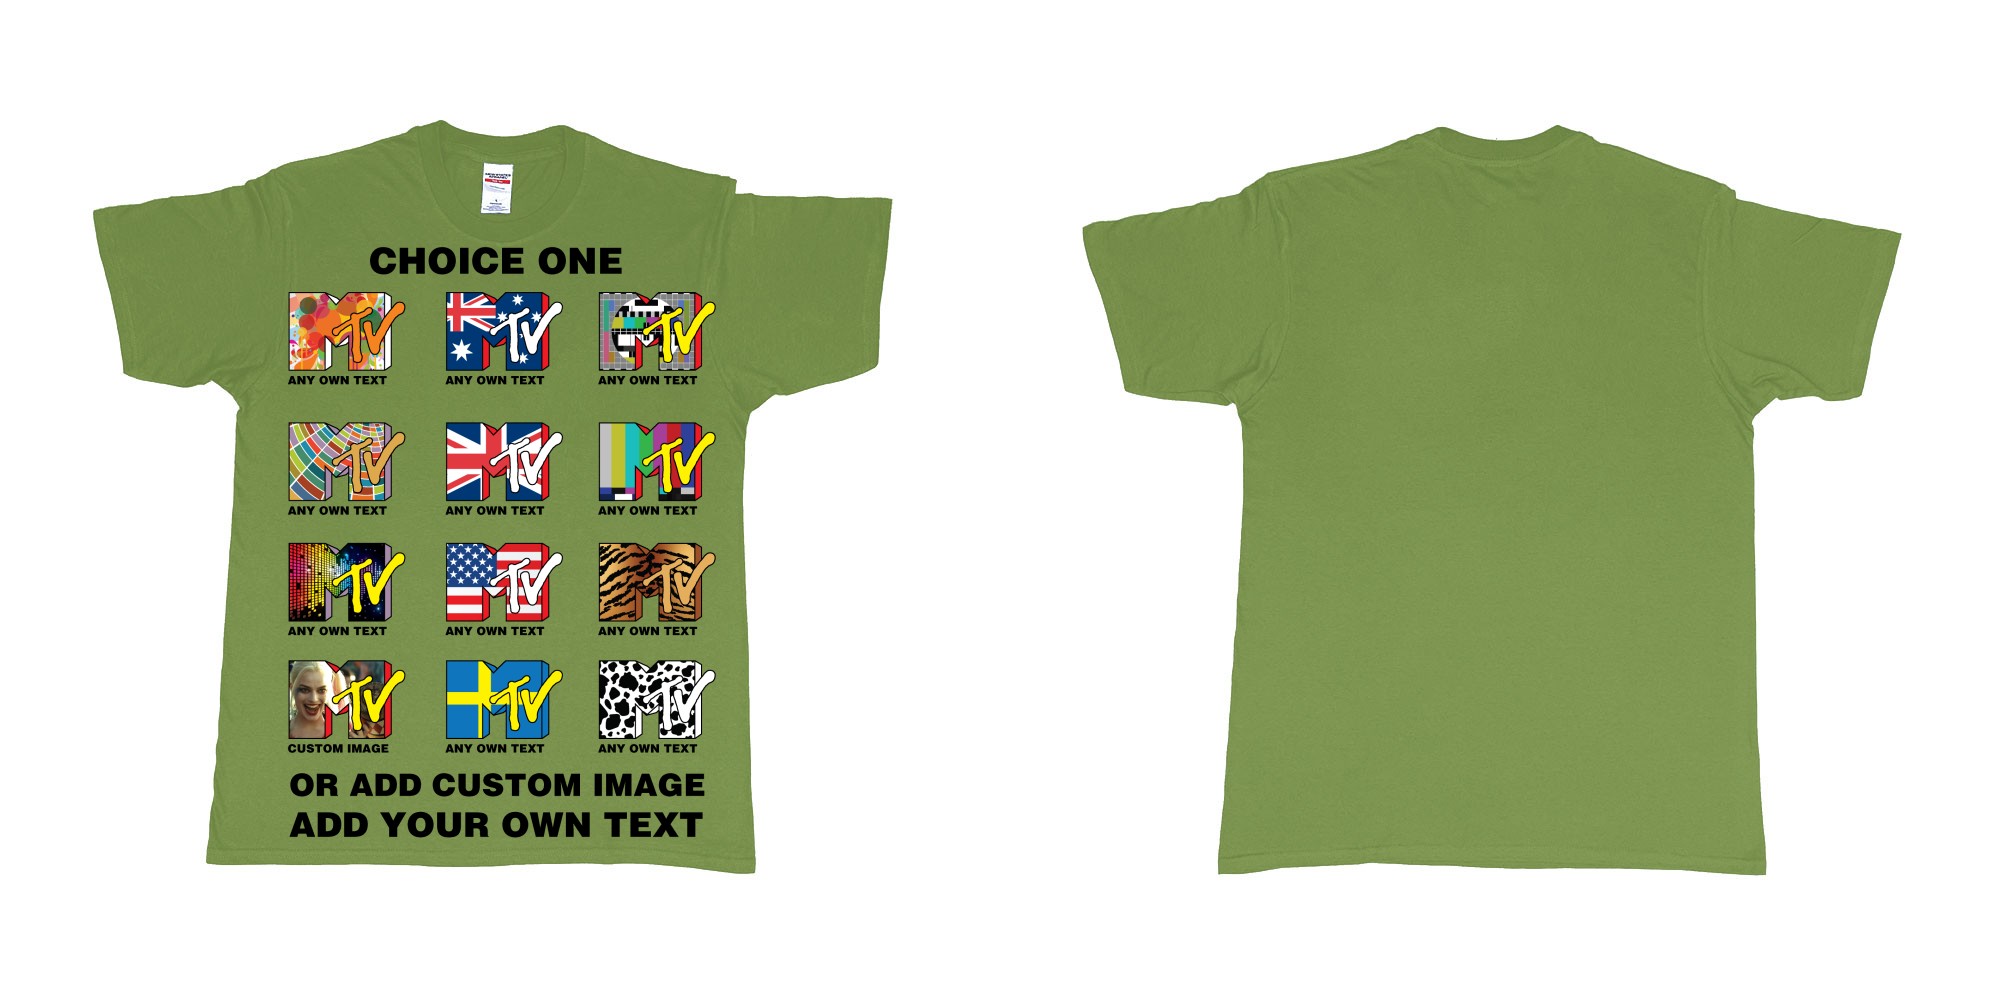 Custom tshirt design mtv logo choice any background text print in fabric color military-green choice your own text made in Bali by The Pirate Way